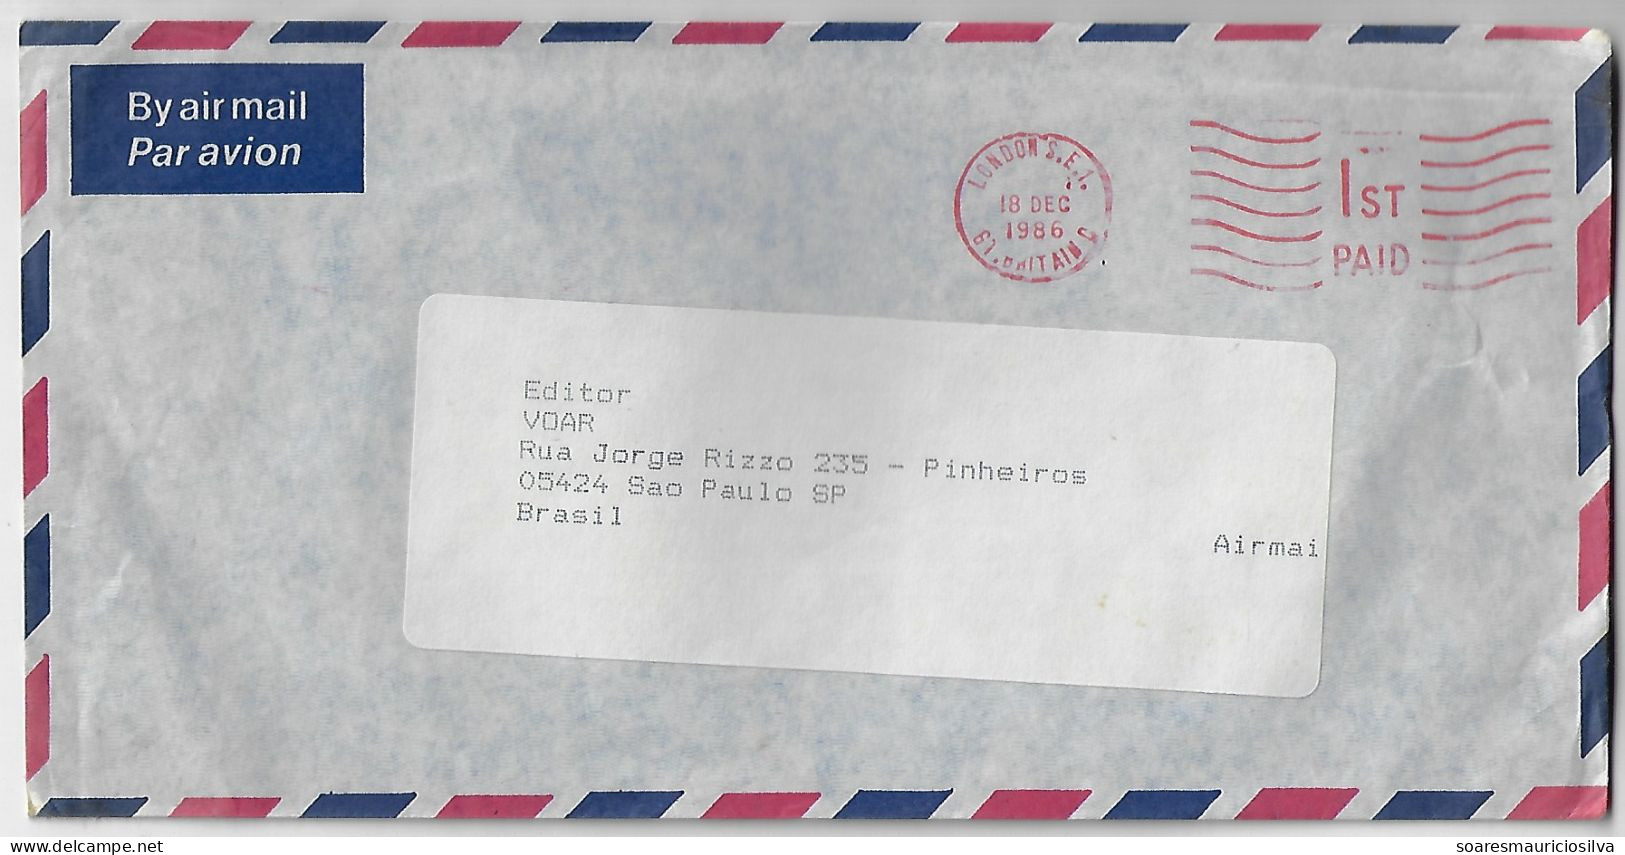 Great Britain 1986 Airmail Cover Sent From London To São Paulo Brazil Red Slogan Cancel With Waves 1st Paid - Covers & Documents